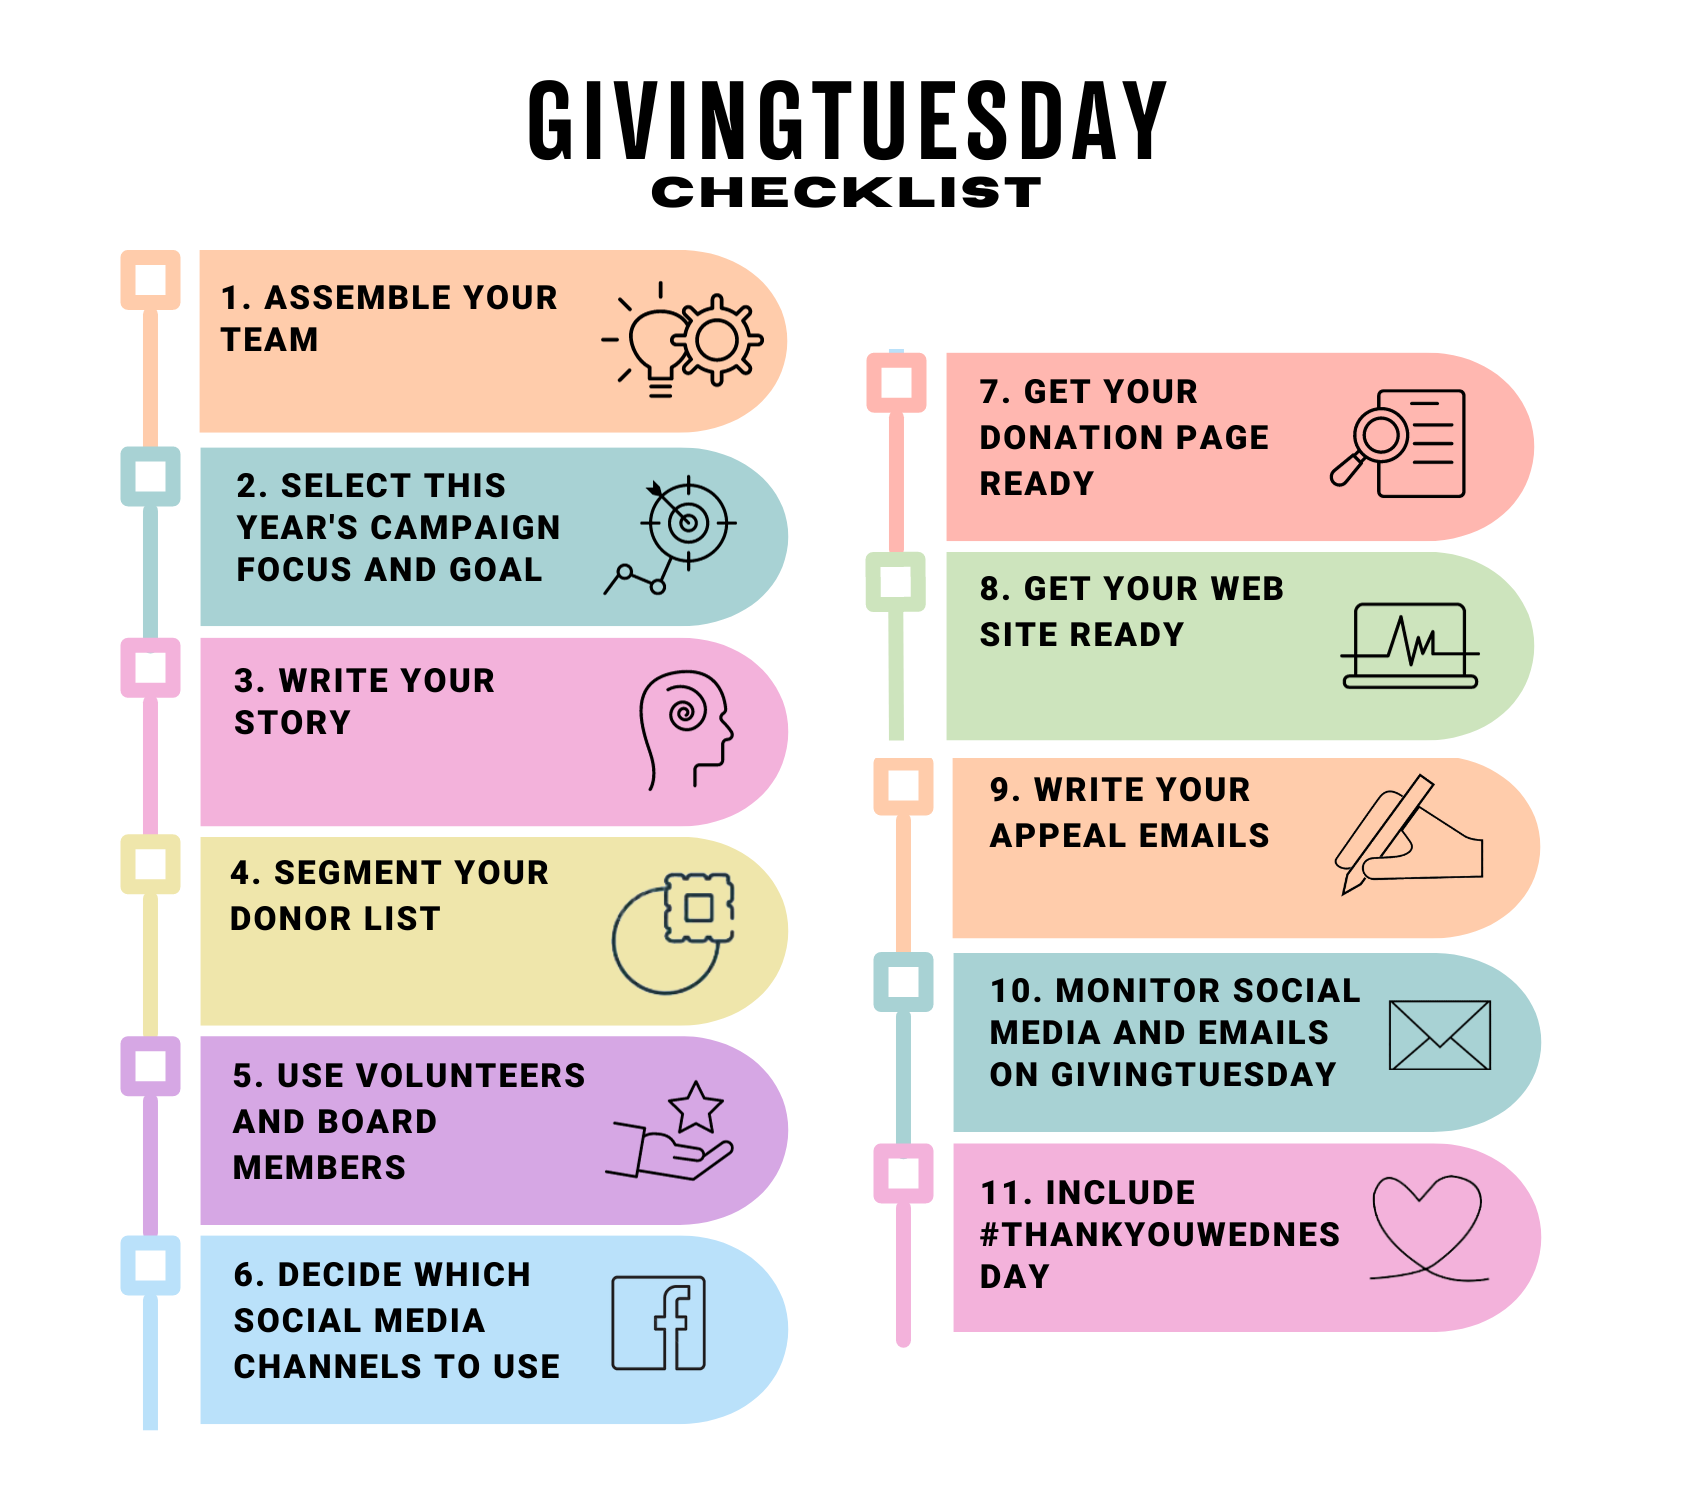 GivingTuesday checklist infographic